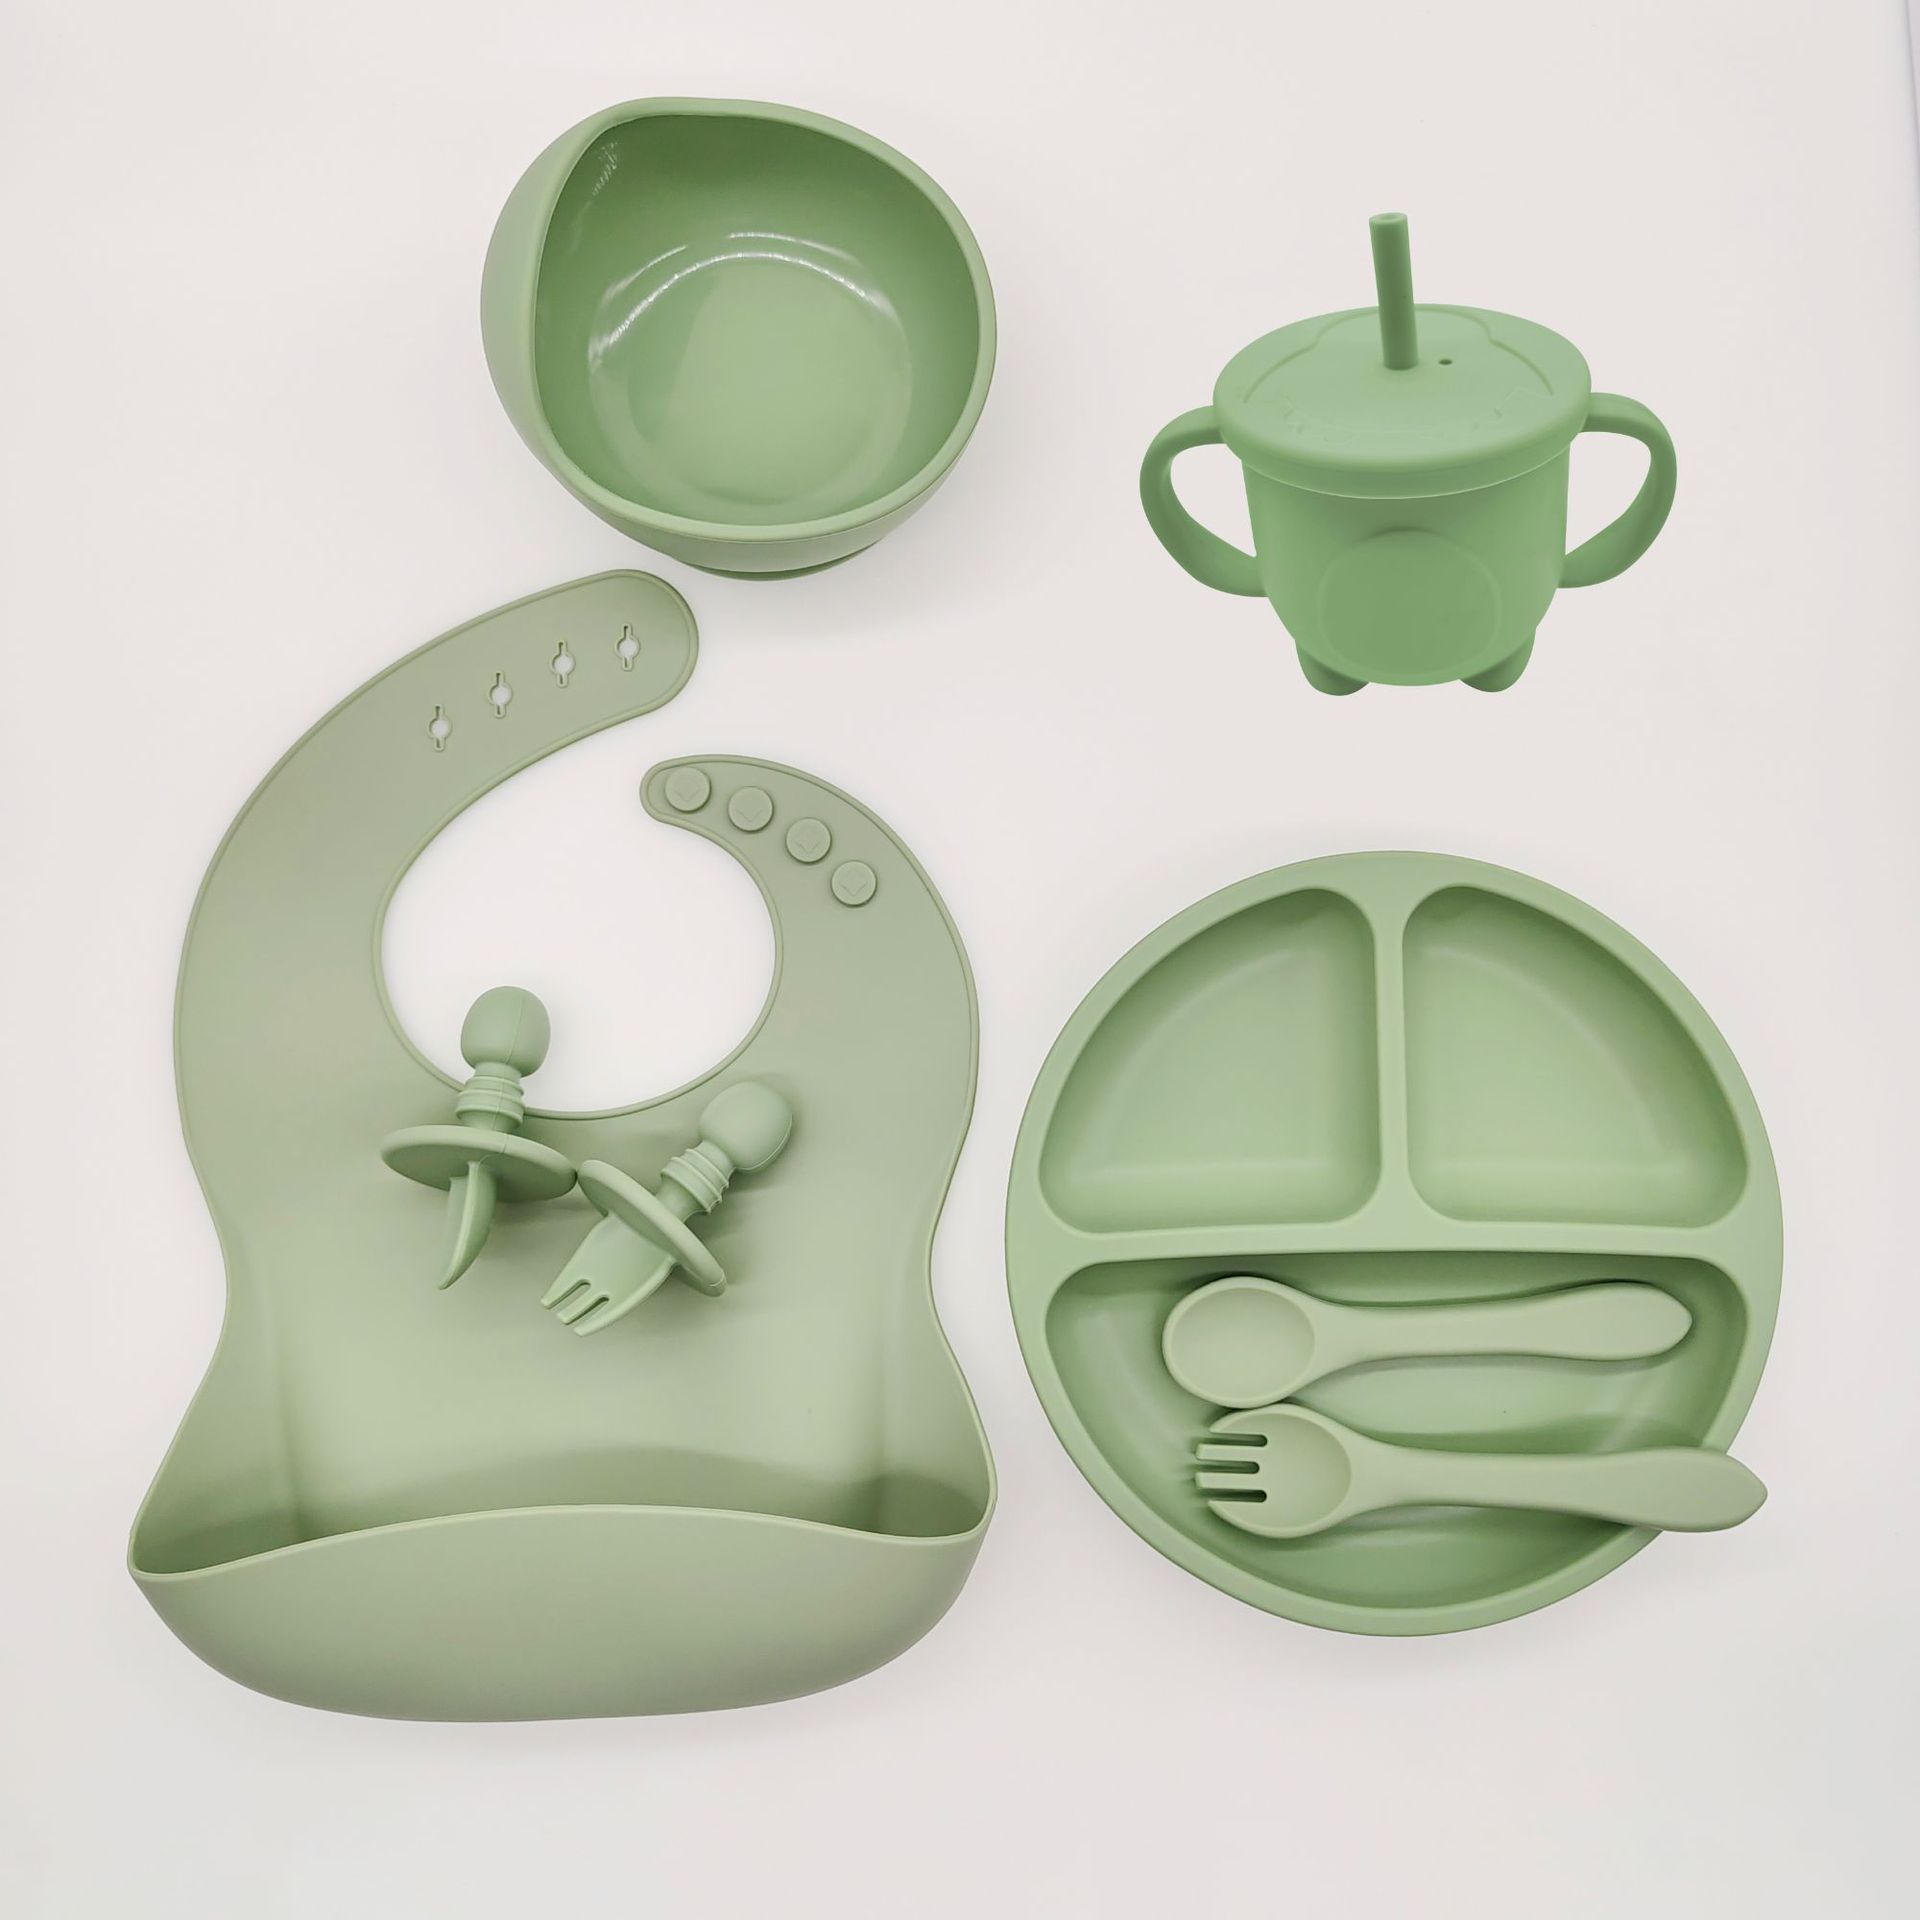 2022 Hot Selling 9 Piece Silicone Tableware Set with Plate Bowl Cup Spoon Fork Bowl Bib for Toddler Babies and Kids